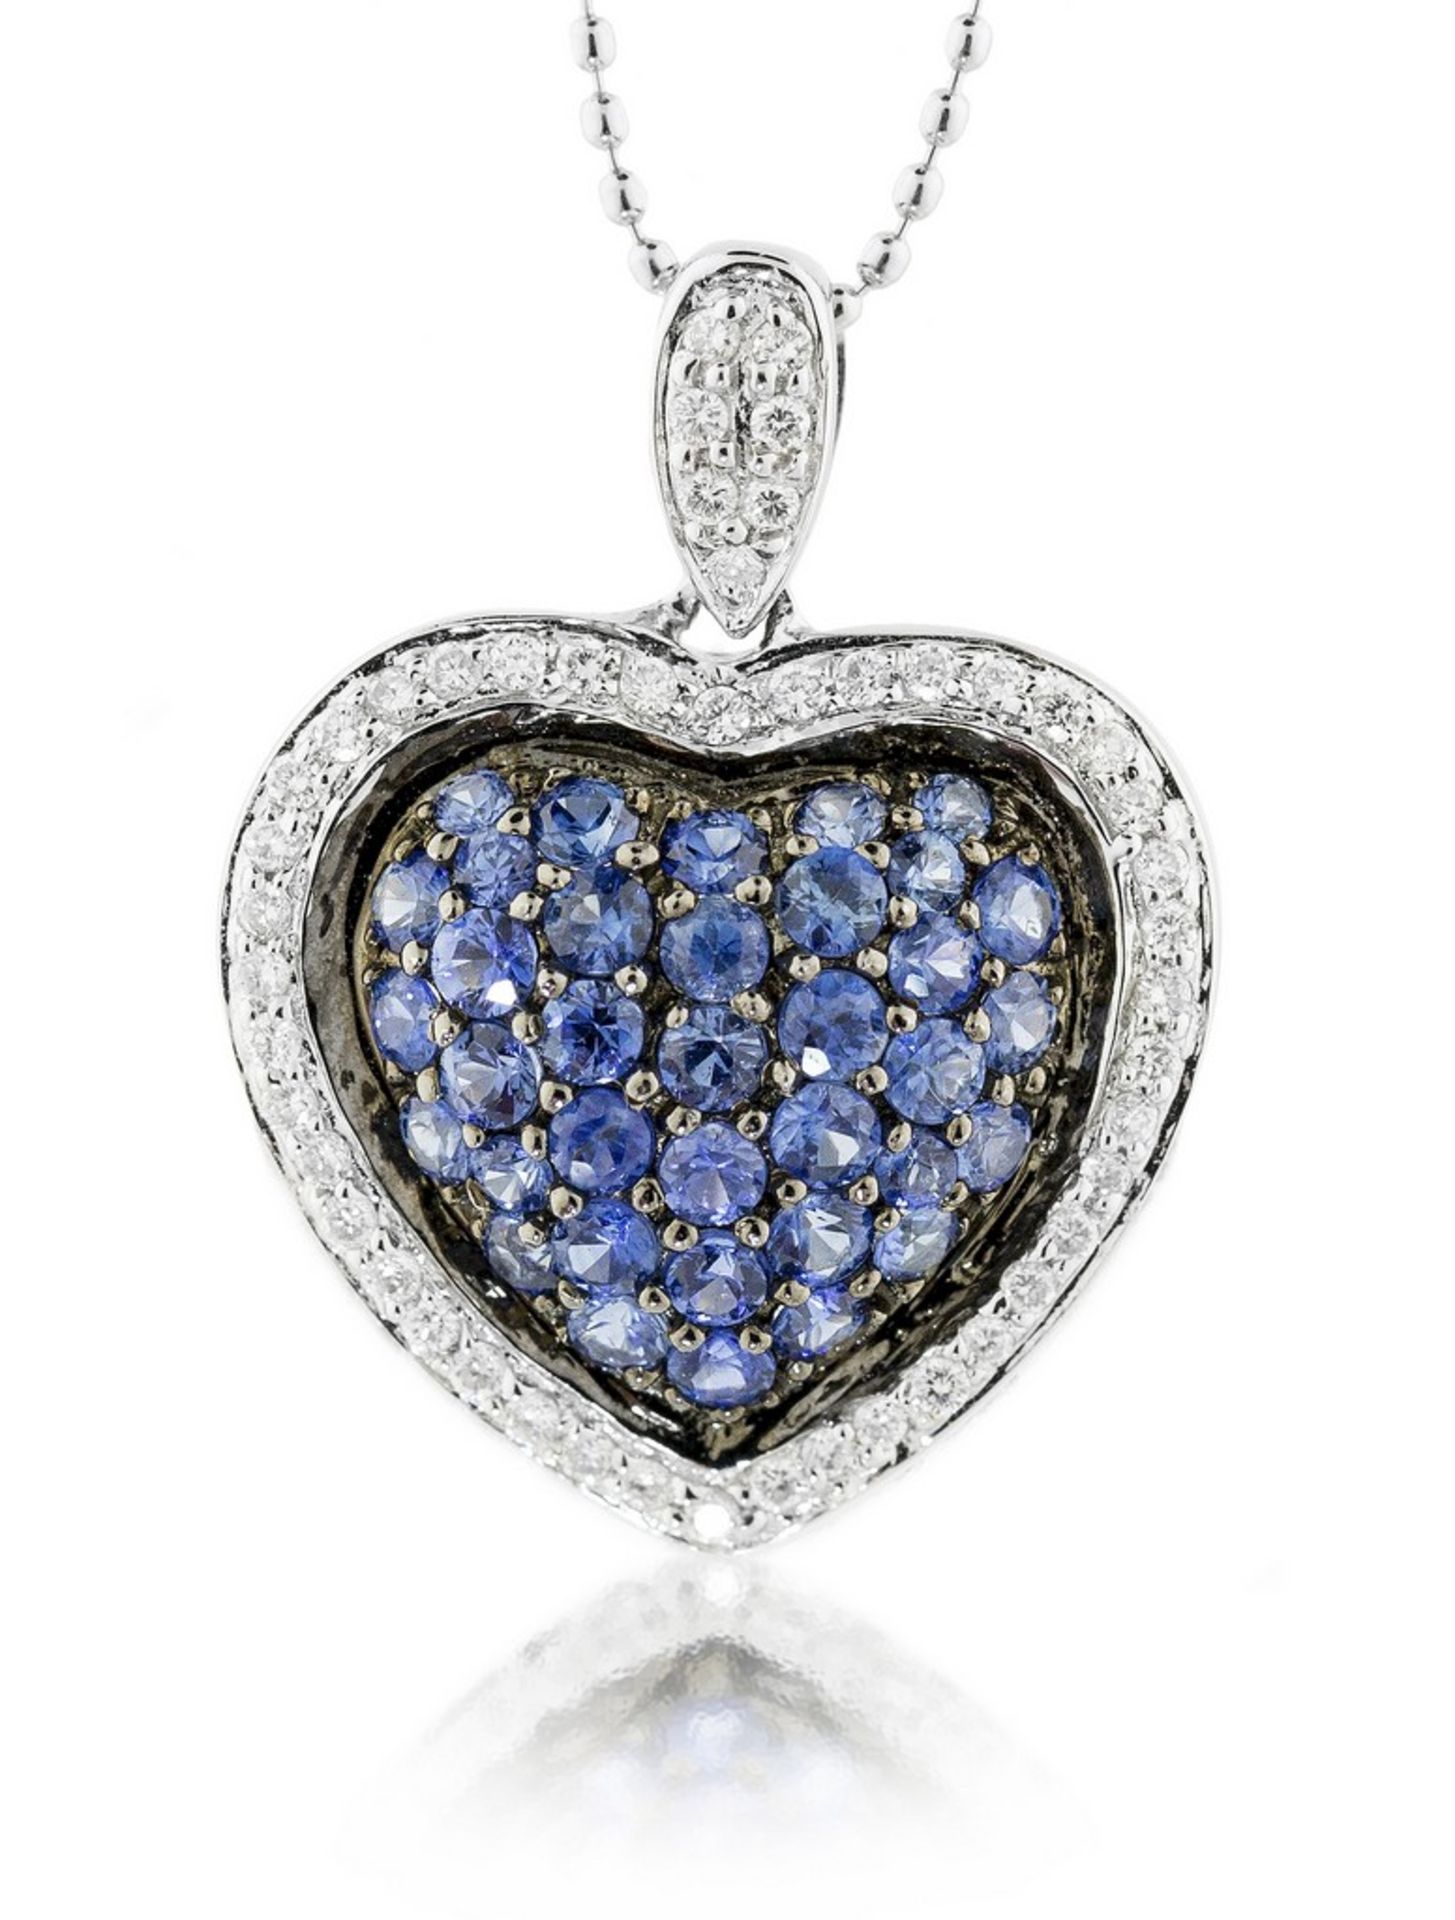 SAPPHIRE AND DIAMOND 'HEART' PENDANT Centered pavi-set sapphires weighing approximately 0.54 carats,